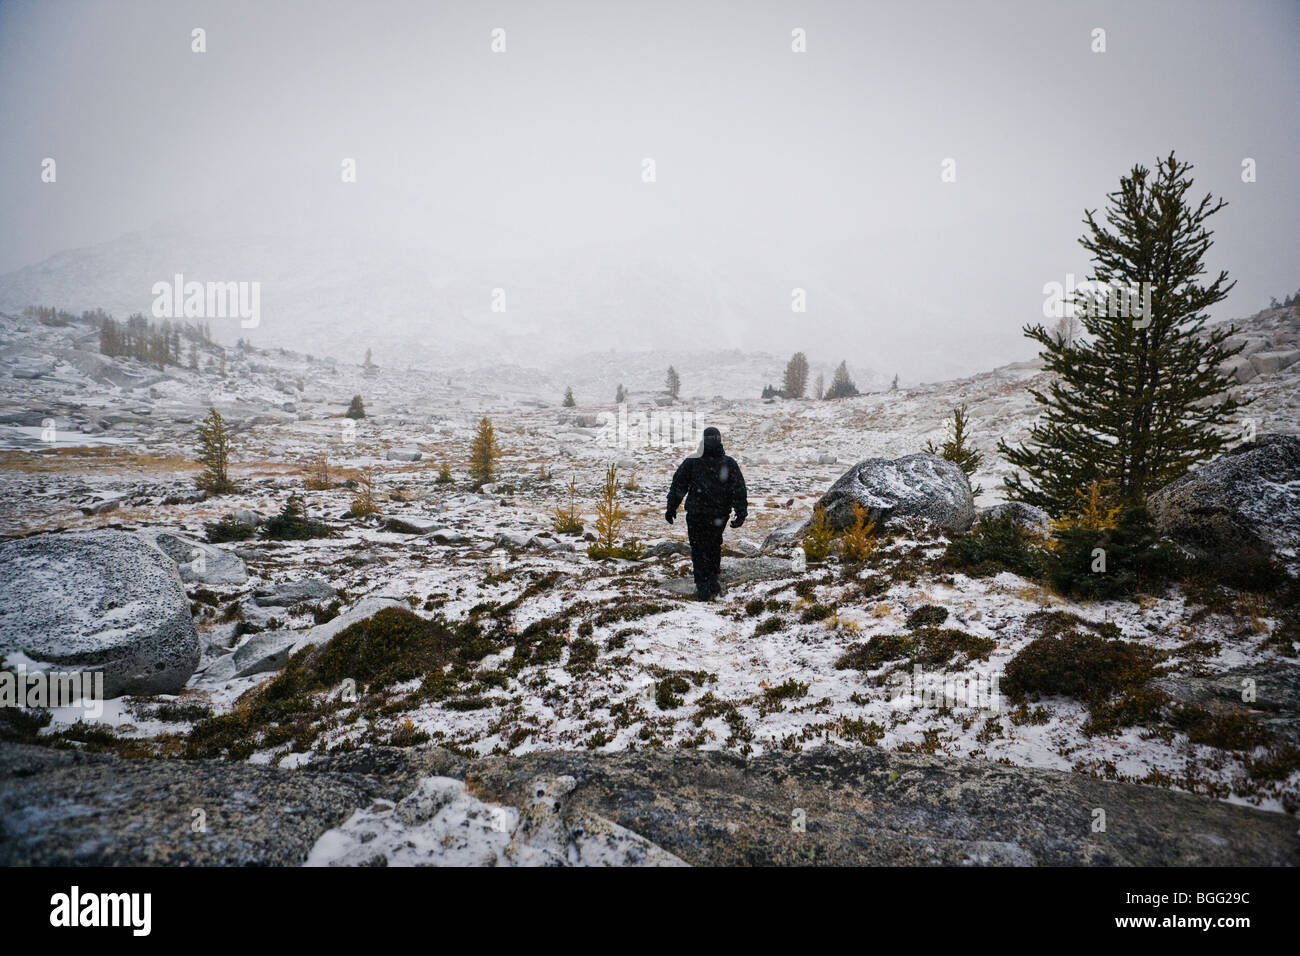 A person walking into a stormy snow covered alpine landscape, Enchantment Lakes Wilderness Area, Washington Cascades, USA. Stock Photo